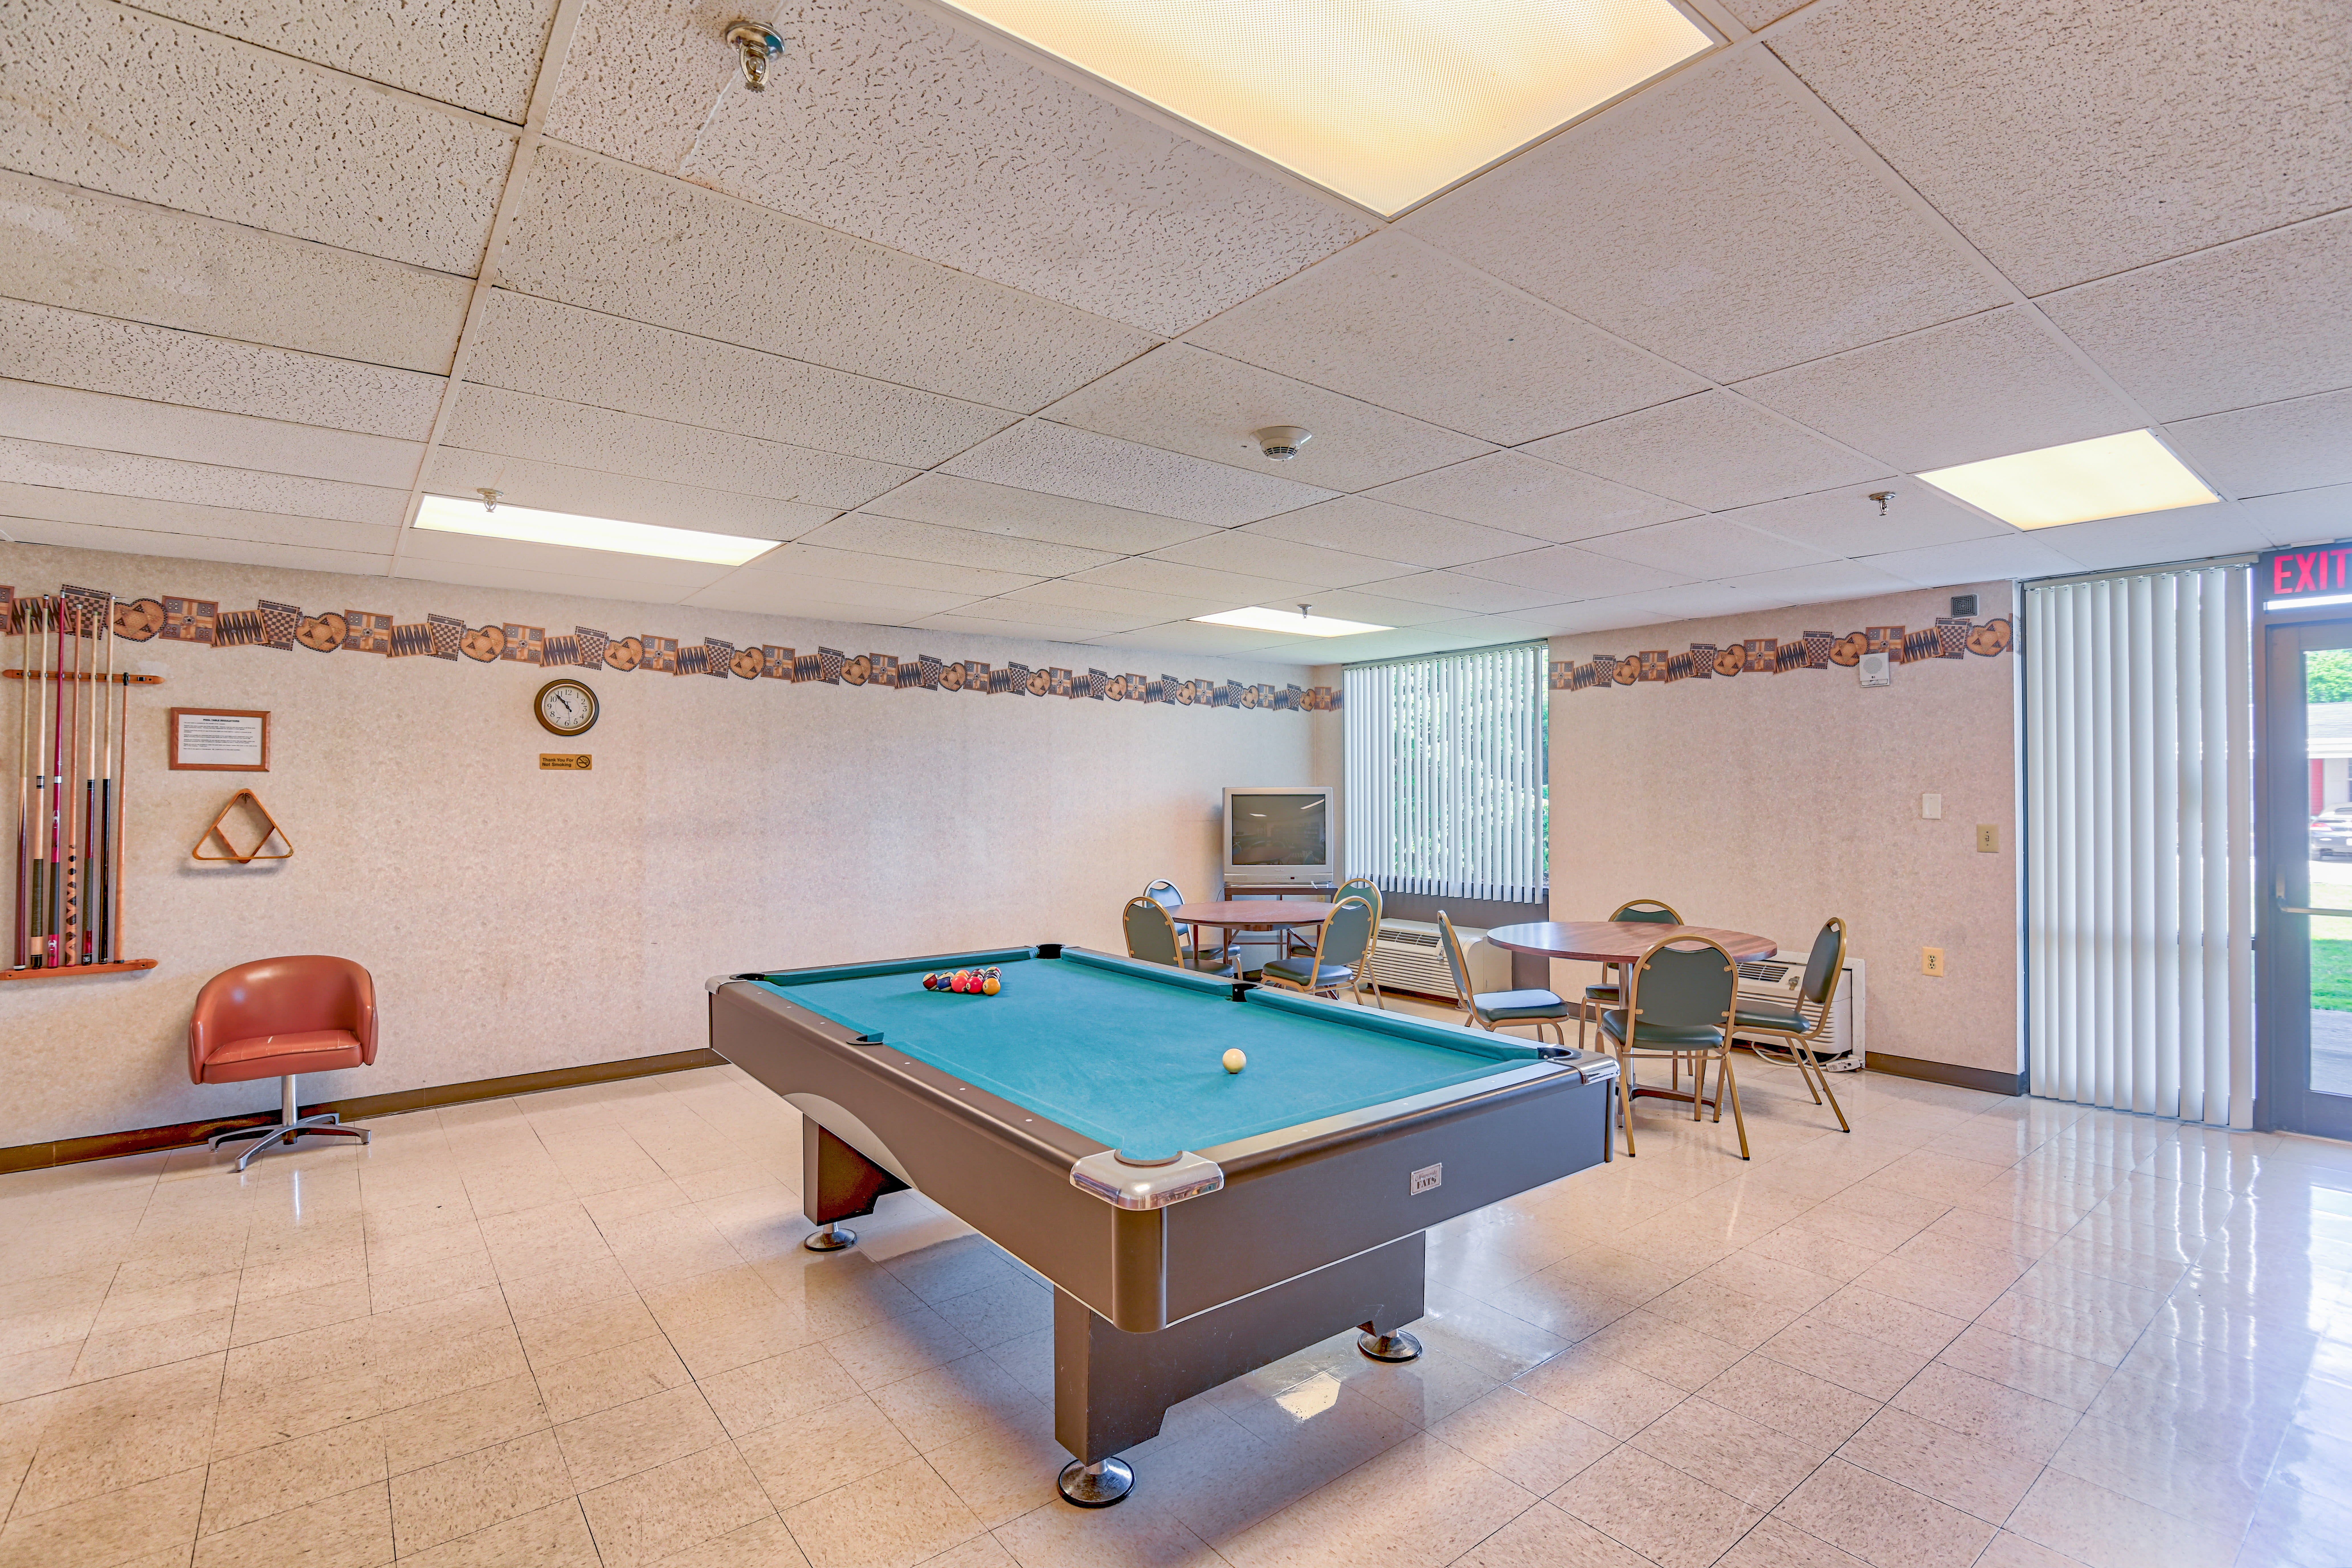 Riverside Towers offers a wide variety of amenities in Coshocton, Ohio